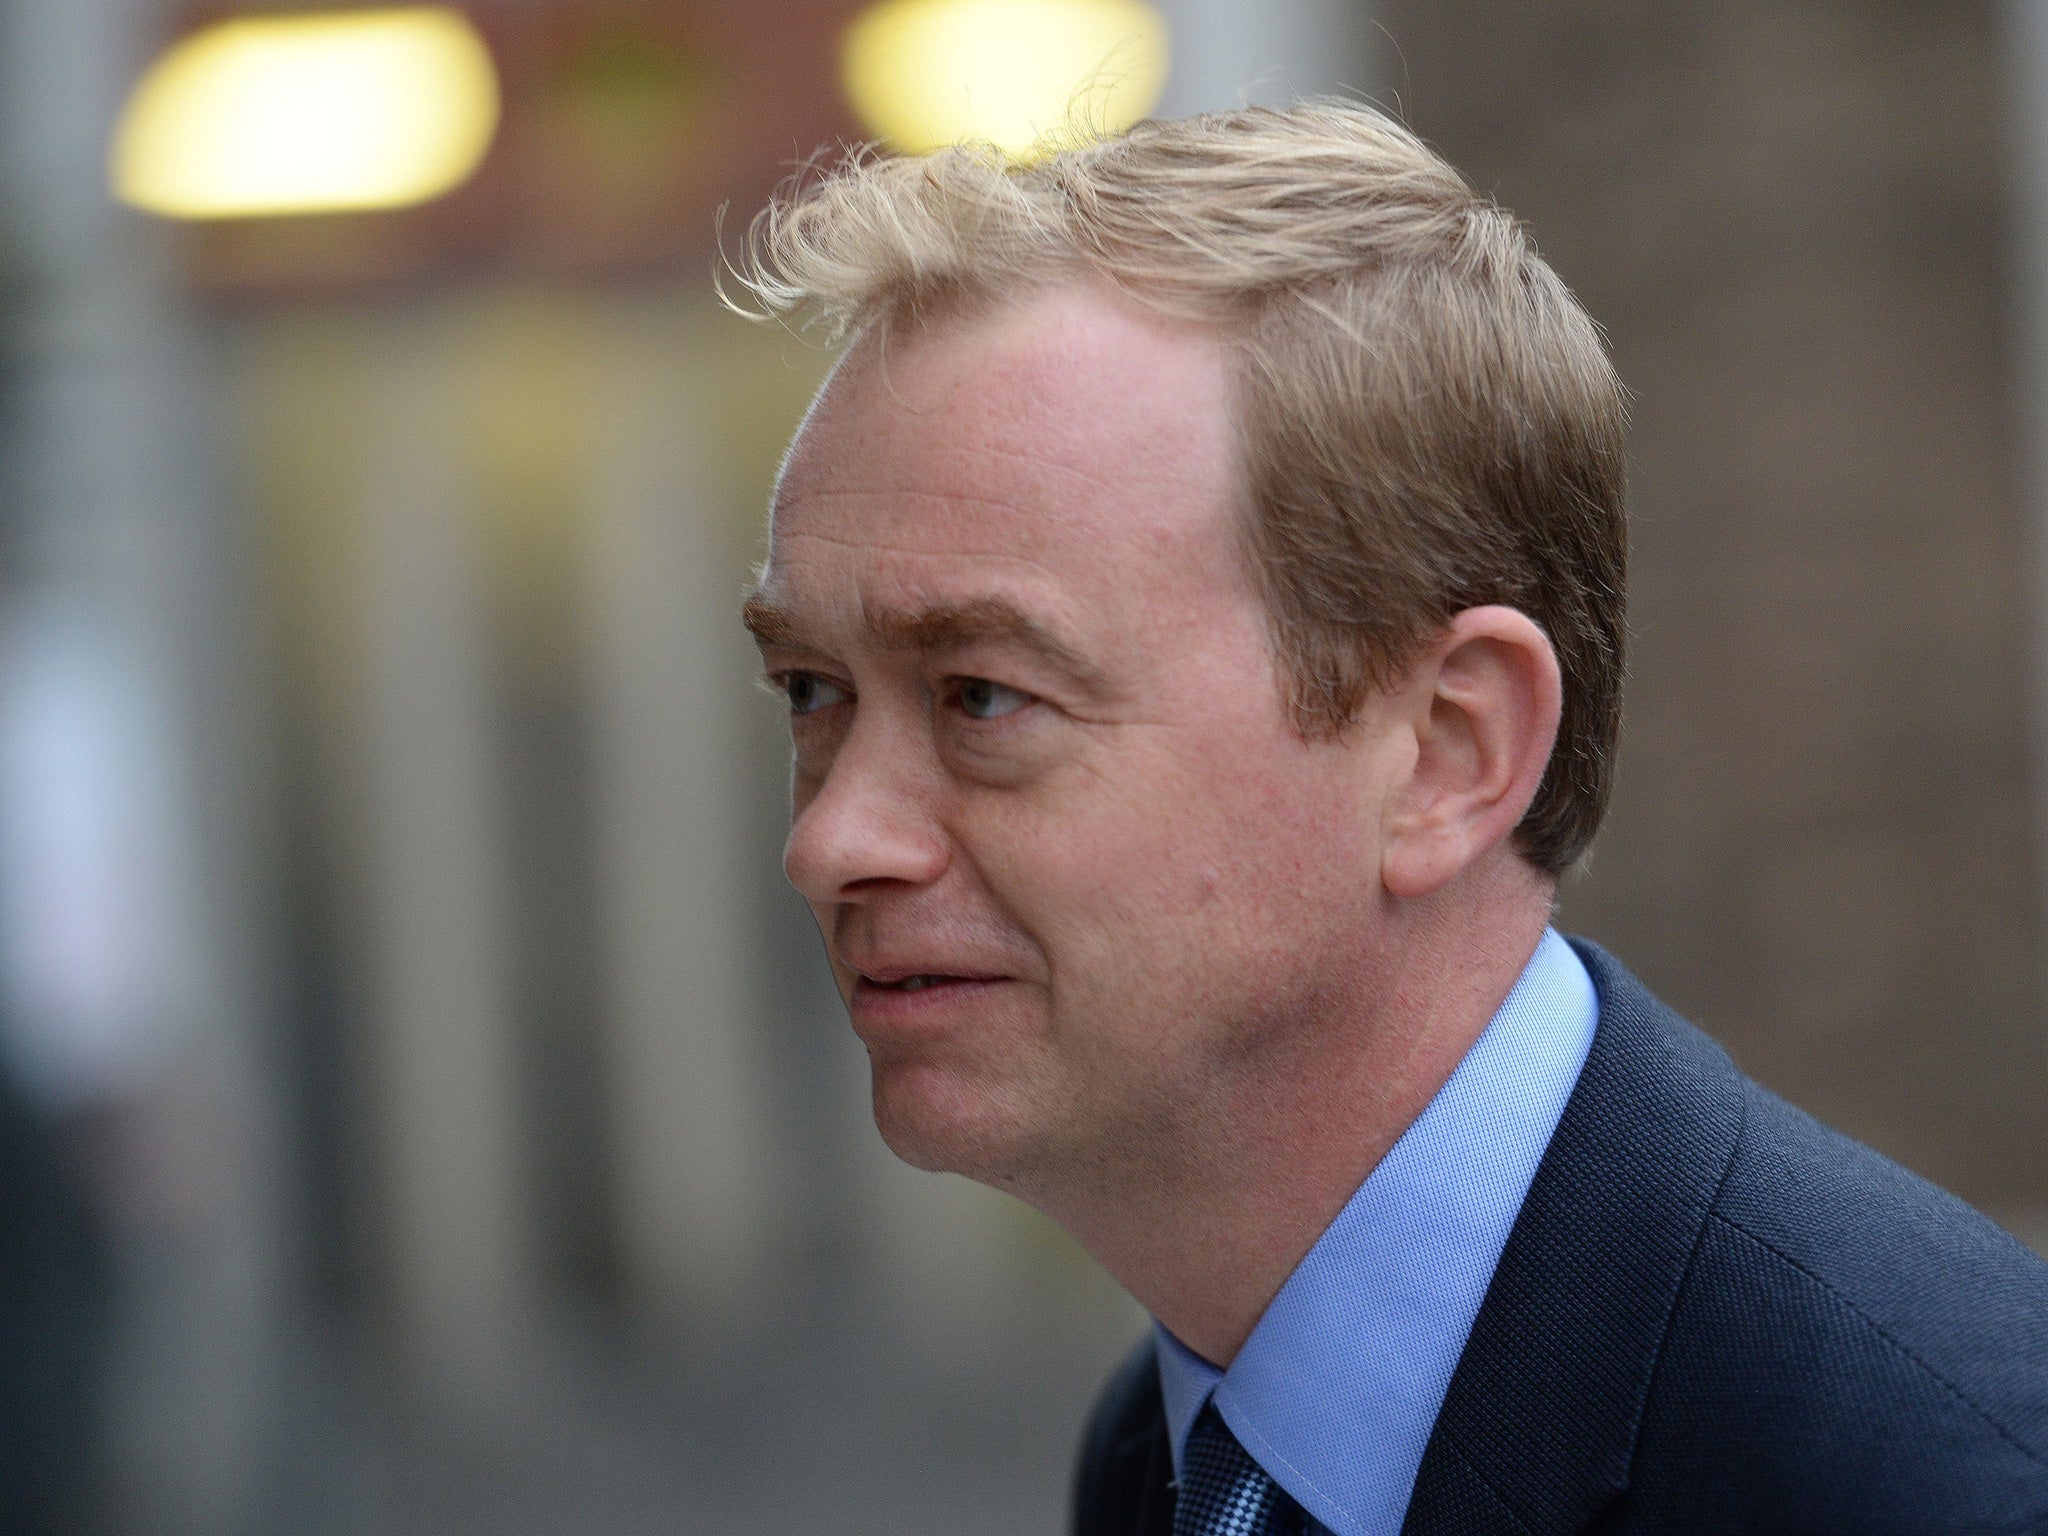 Liberal Democrat leader Tim Farron has said that his party will strongly oppose the Draft Investigatory Powers Bill